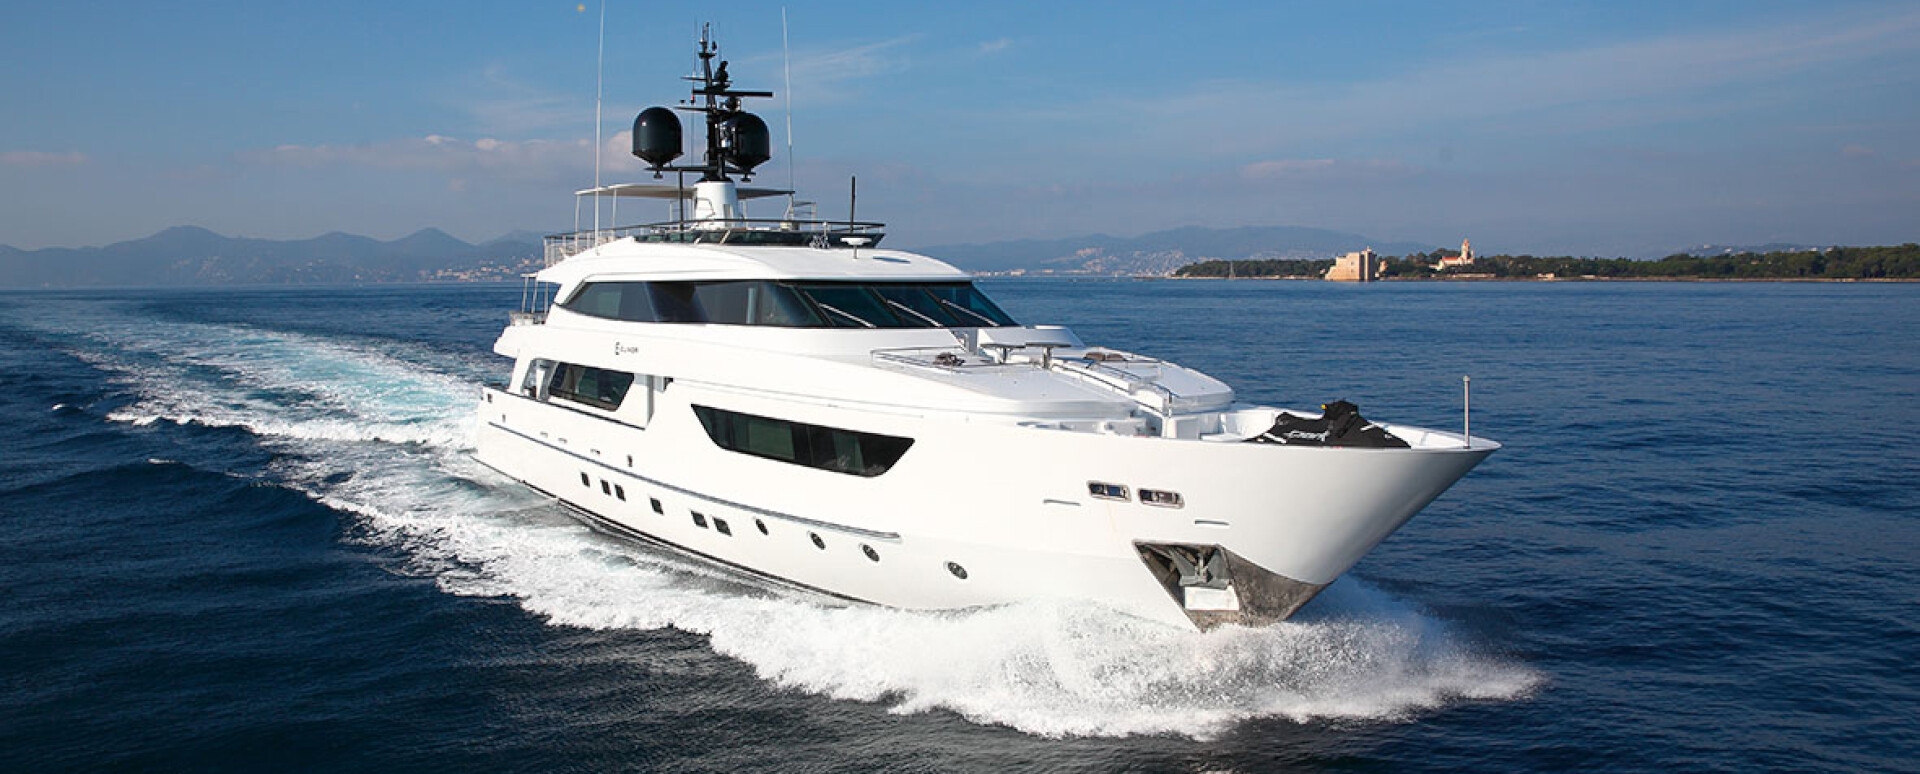                                                                                                     Better than Ever M/Y Elinor ! Available for Viewings at ECPY in Nice on April 18-19 
                                                                                            